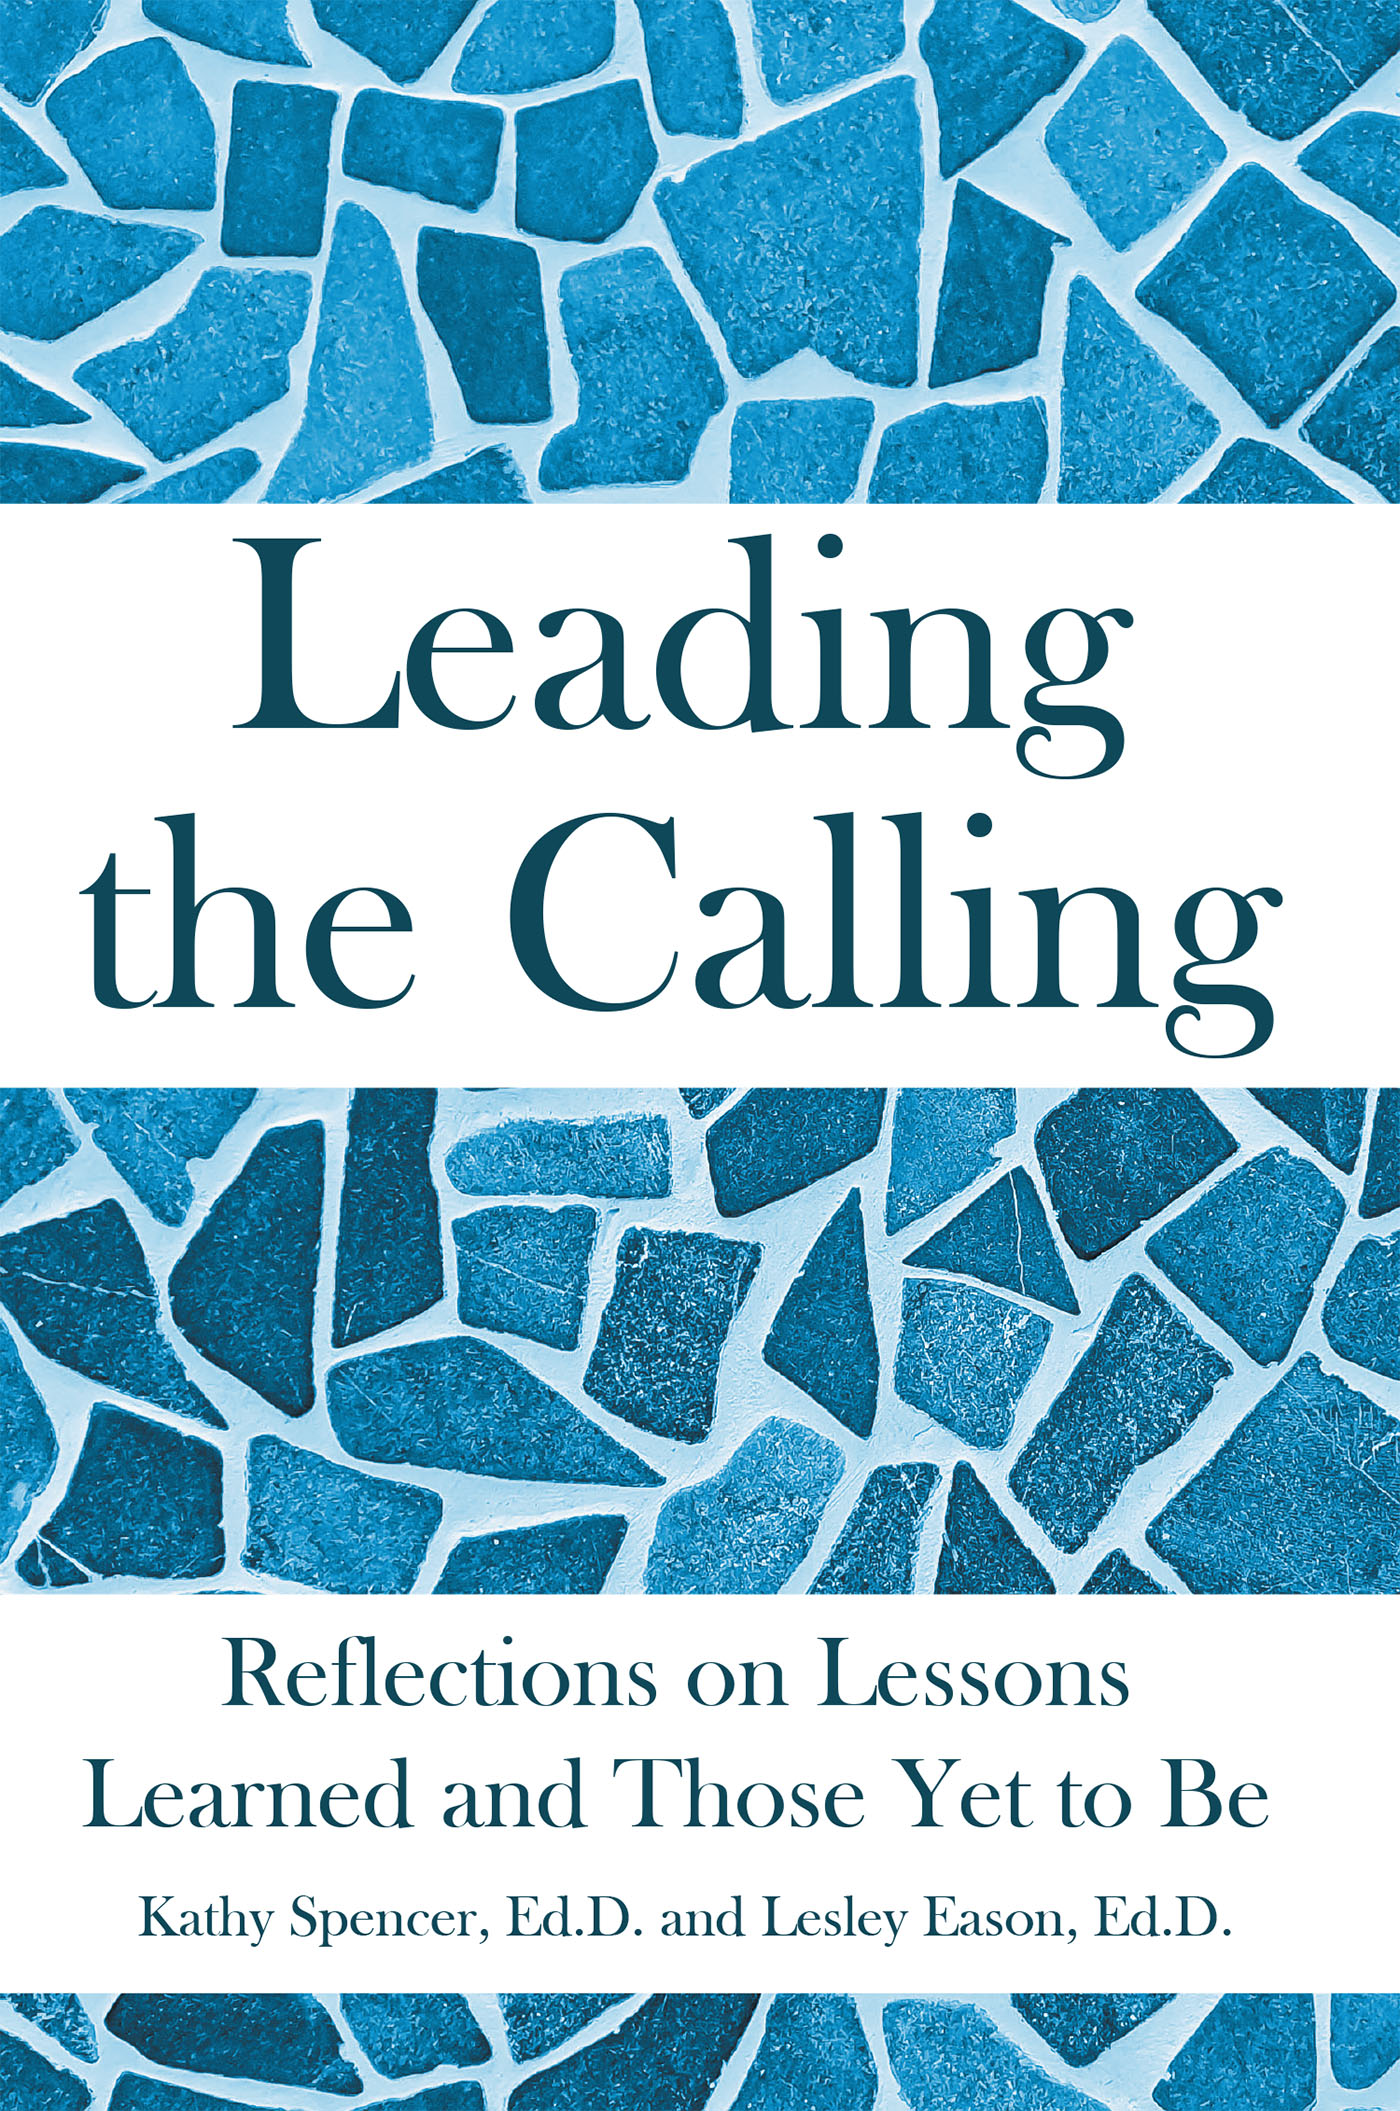 Author Kathy Spencer, Ed.D. and Lesley Eason, Ed.D.’s New Book, “Leading the Calling,” Explores the Need for Reflective Leadership Within the Education Field